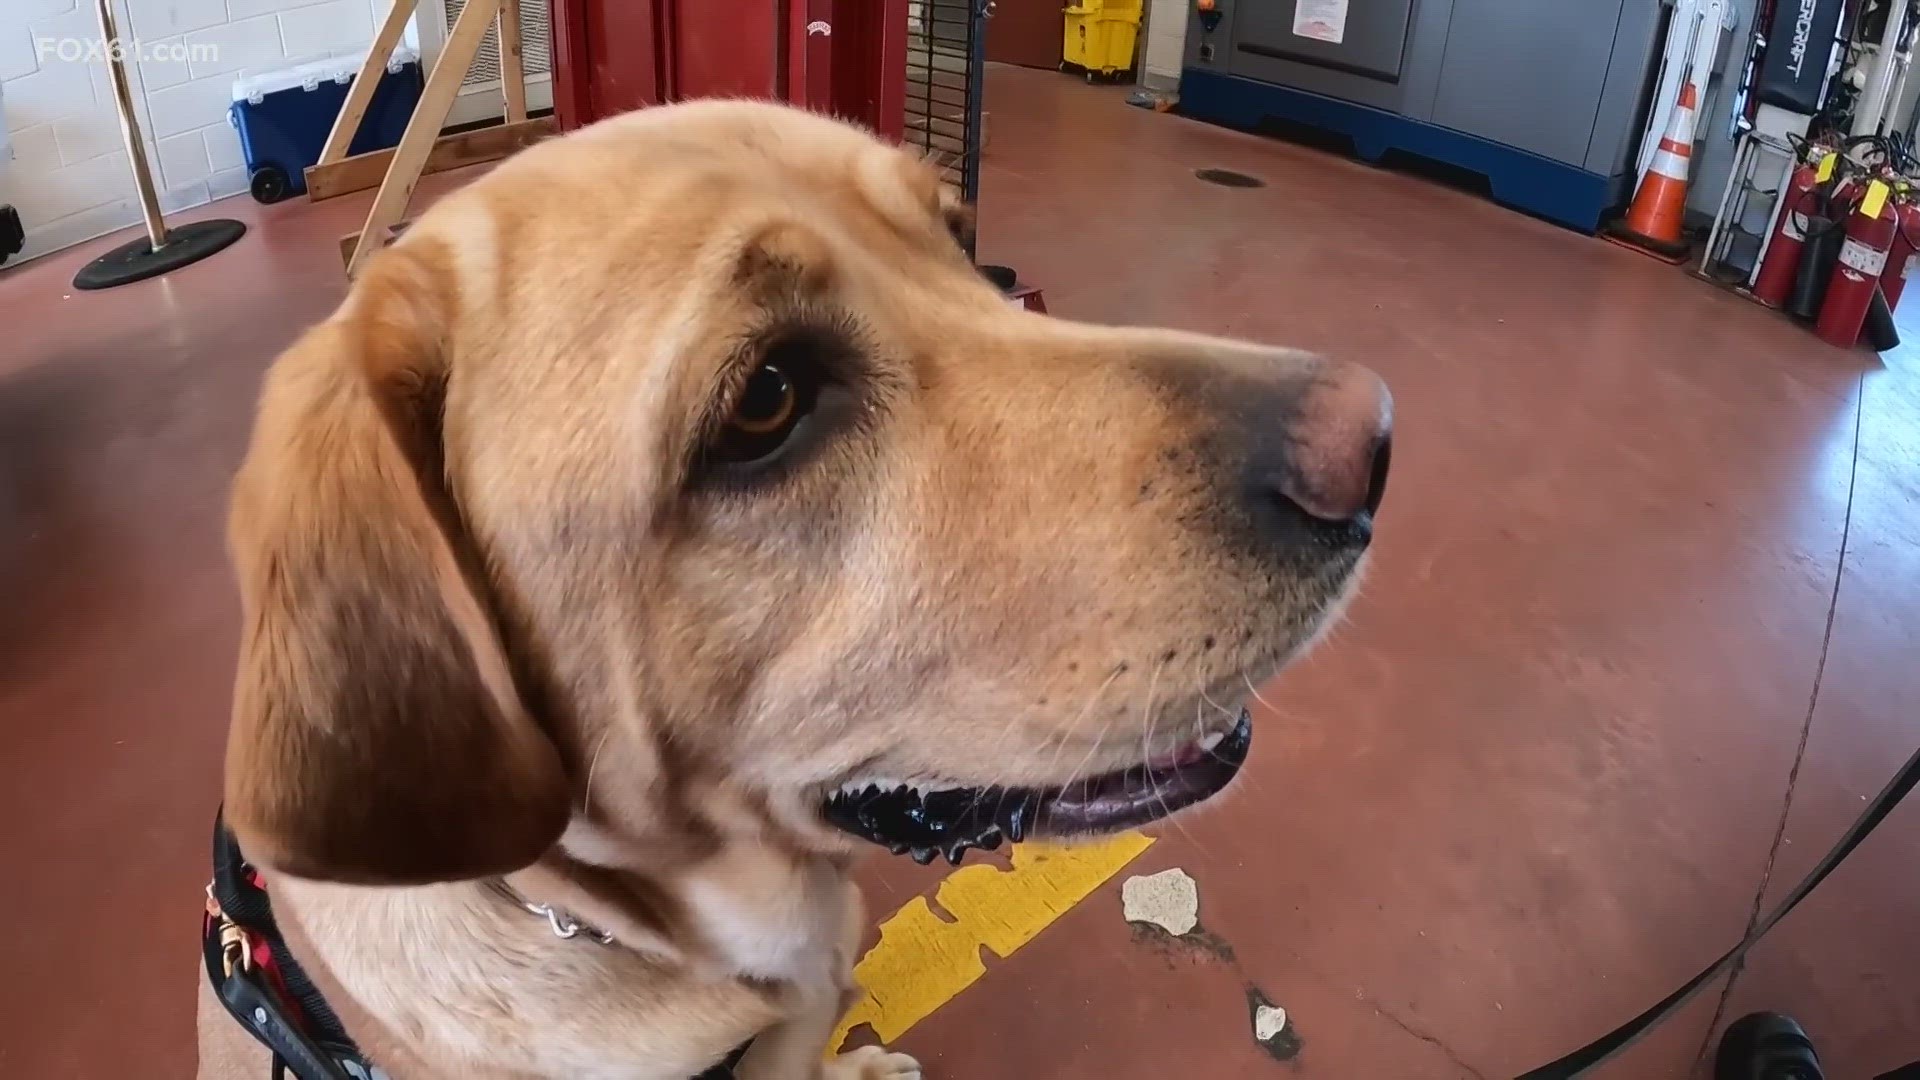 Lola, a two-and-a-half-year-old, lovable yellow Labrador Retriever is in her first week as part of the West Hartford Fire Department.